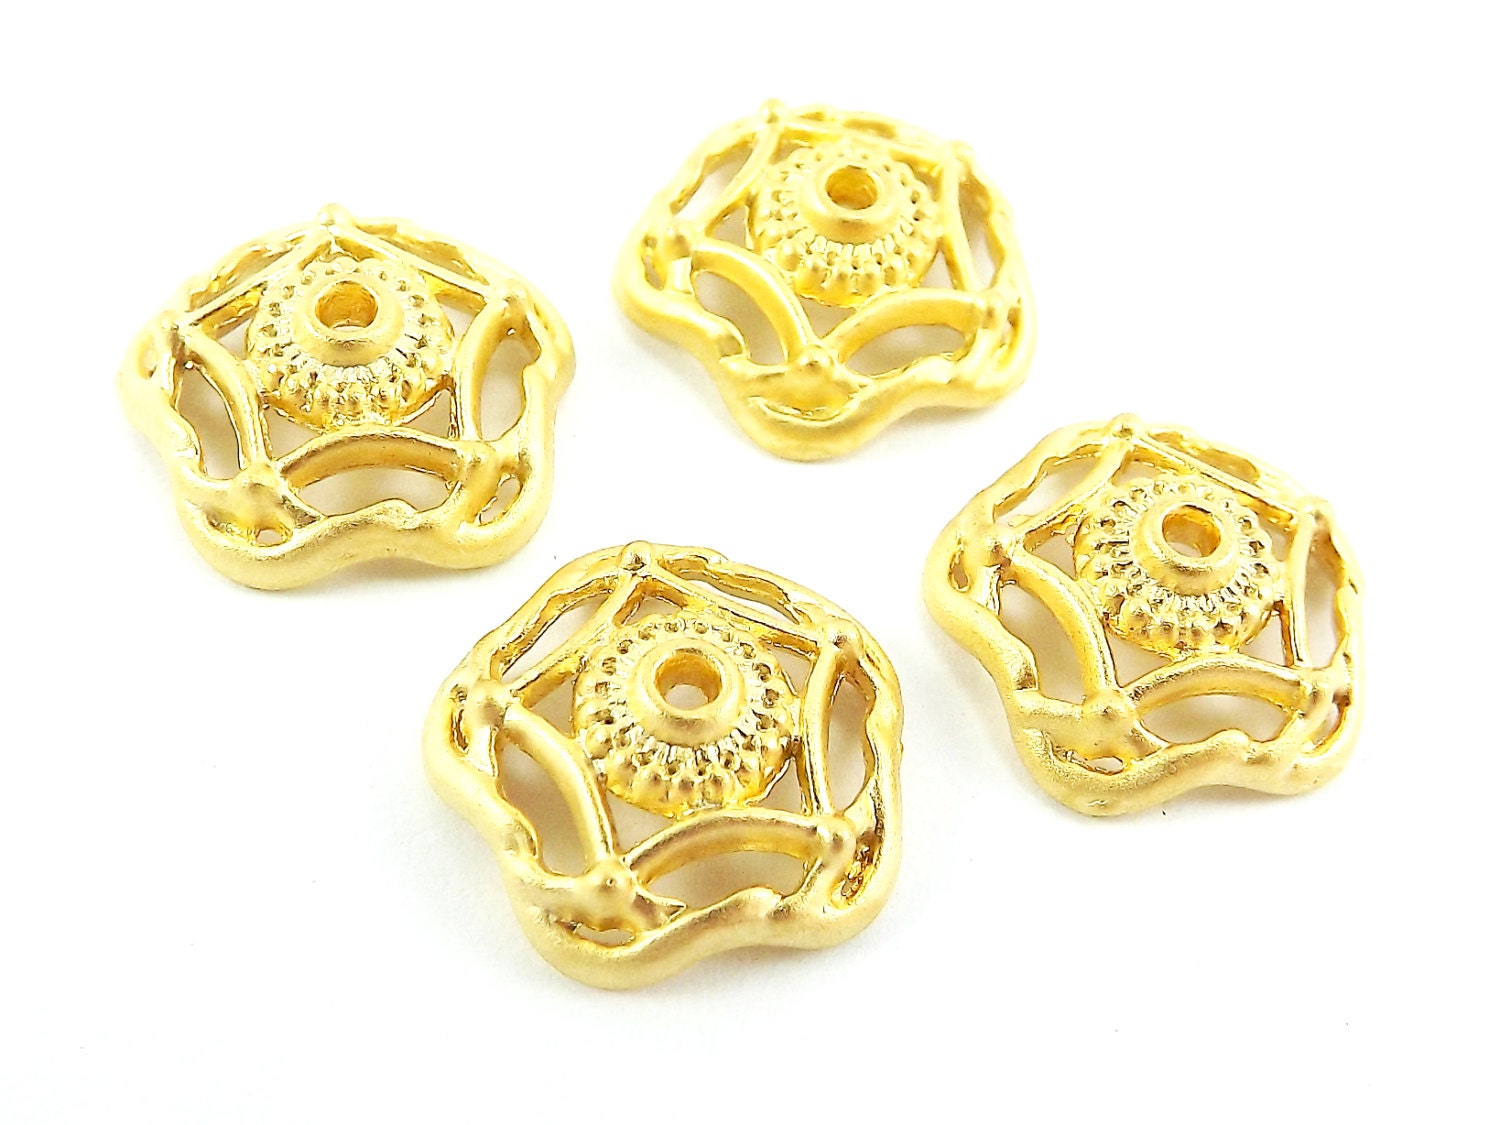 4 Shallow Wavy Bead End Caps -  16mm Wide 22k Matte Gold Plated Round Bead caps